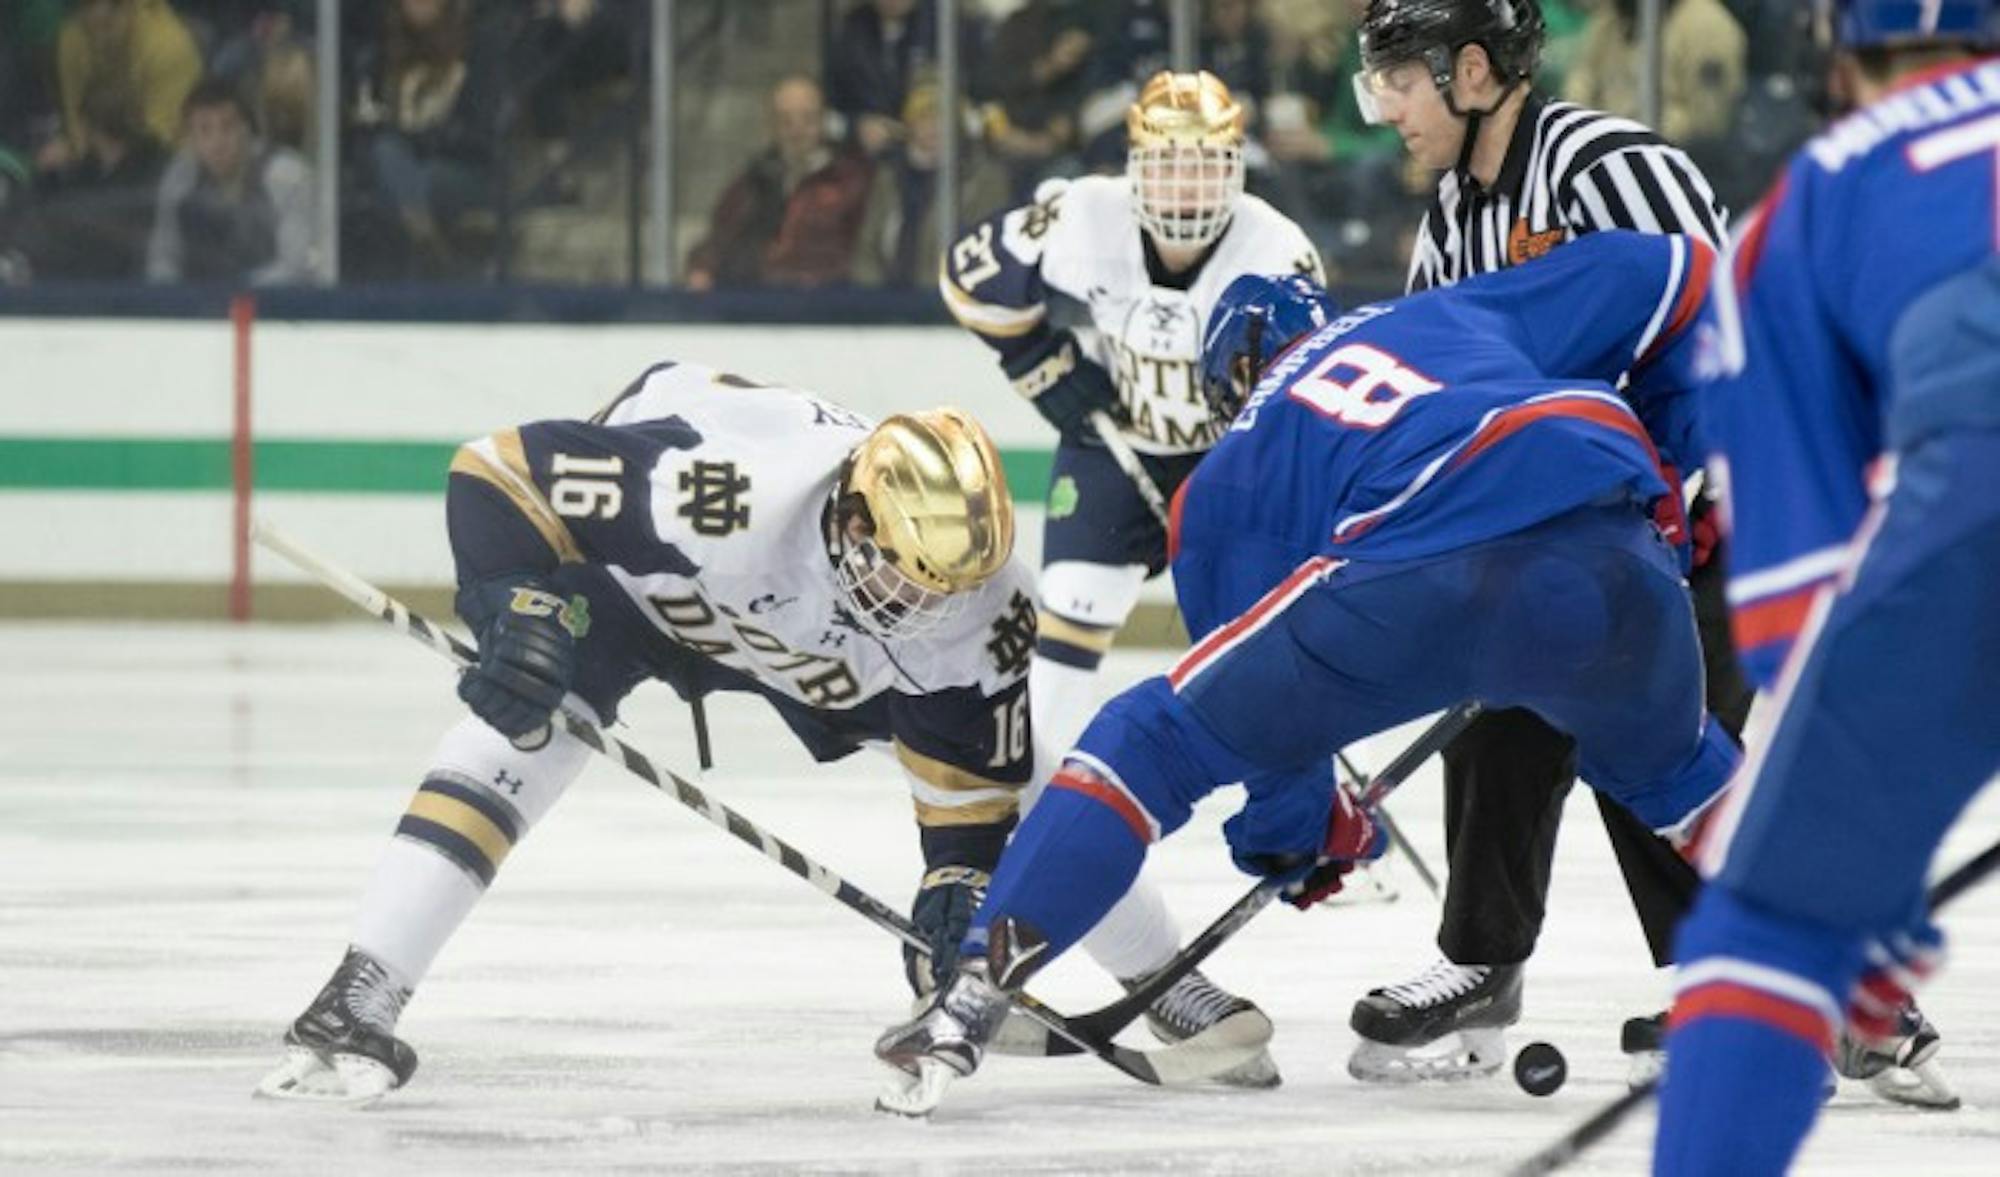 Irish junior forward Connor Hurley takes the face-off during Notre Dame’s 4-1 loss to UMass Lowell on Thursday at Compton Family Ice Arena.